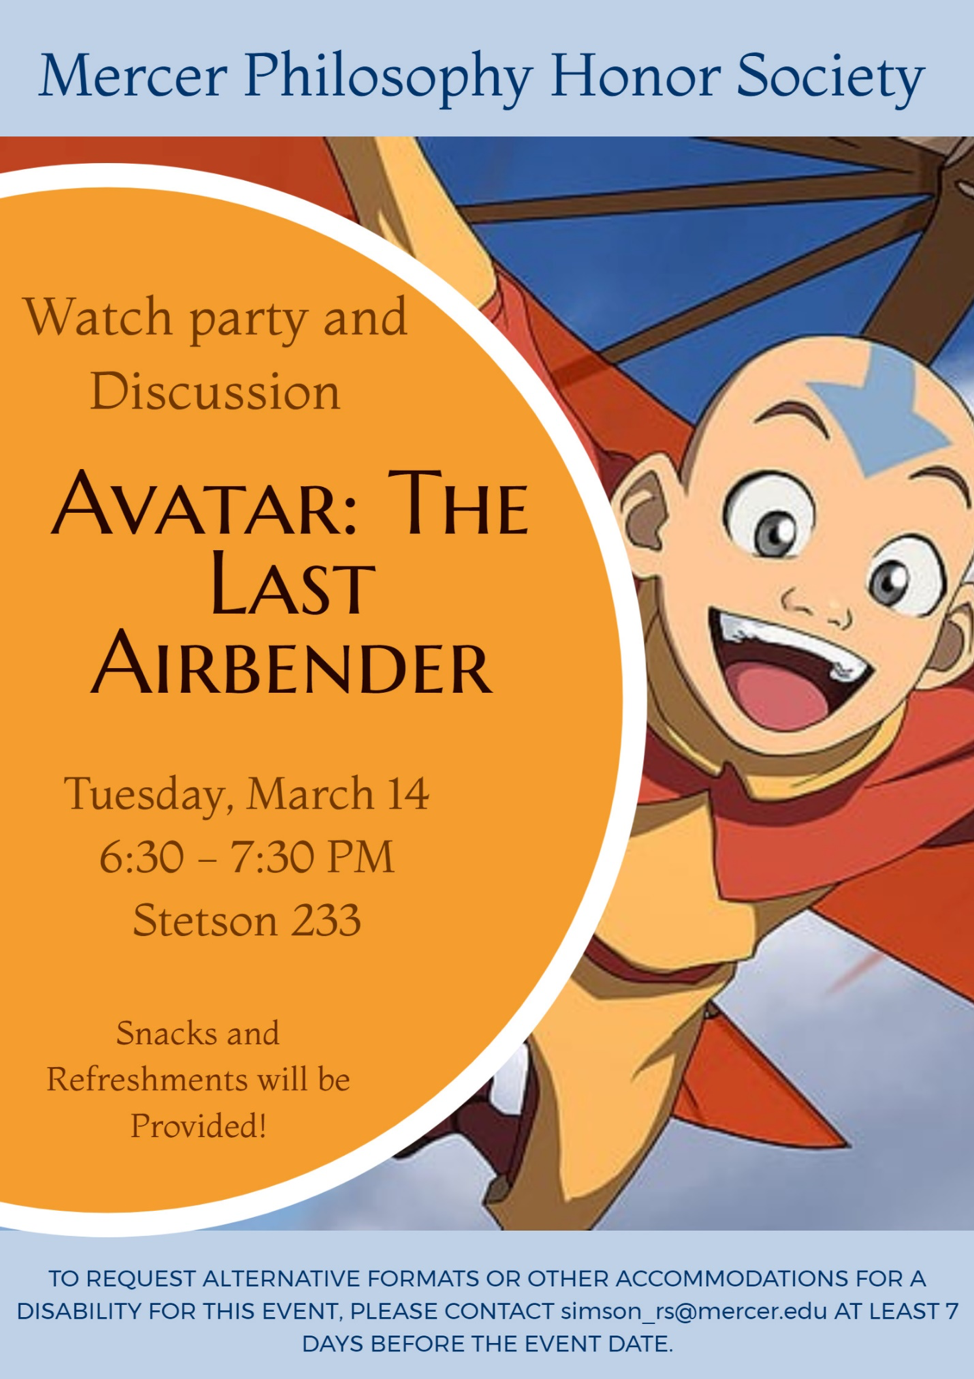 The Last Airbender streaming where to watch online